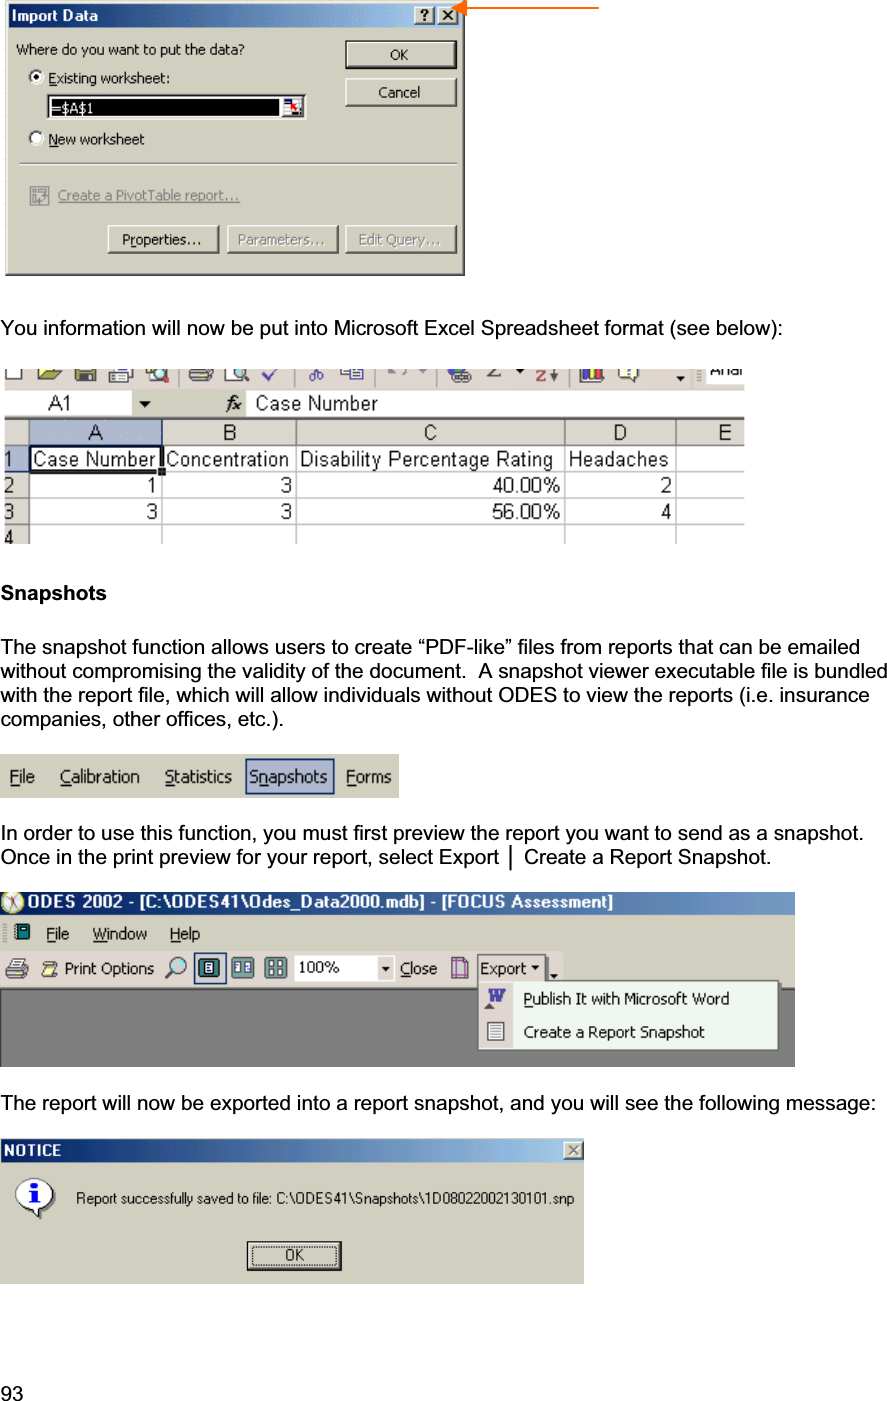 93     You information will now be put into Microsoft Excel Spreadsheet format (see below): Snapshots The snapshot function allows users to create “PDF-like” files from reports that can be emailed without compromising the validity of the document.  A snapshot viewer executable file is bundled with the report file, which will allow individuals without ODES to view the reports (i.e. insurance companies, other offices, etc.). In order to use this function, you must first preview the report you want to send as a snapshot.  Once in the print preview for your report, select Export Ň Create a Report Snapshot. The report will now be exported into a report snapshot, and you will see the following message: 